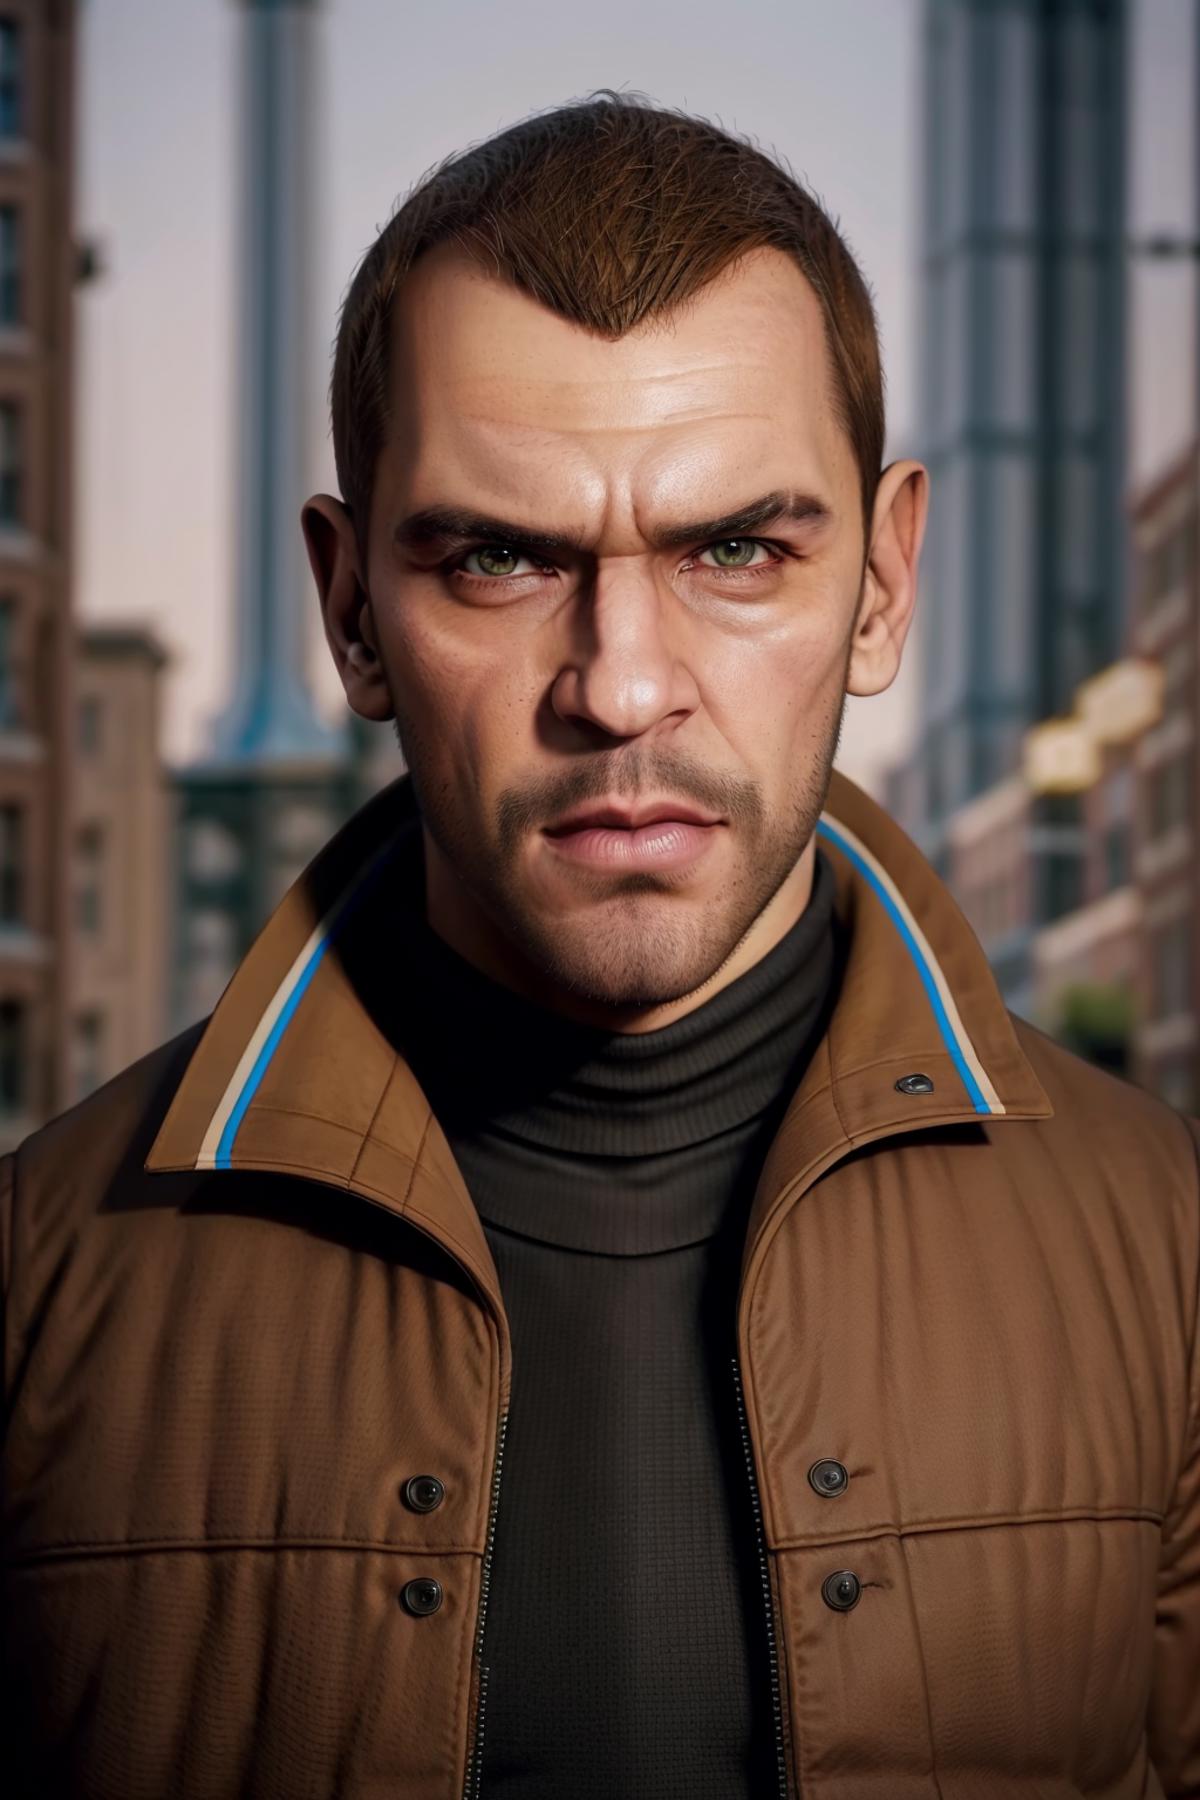 A man wearing a brown jacket and a collar, looking serious and intense.